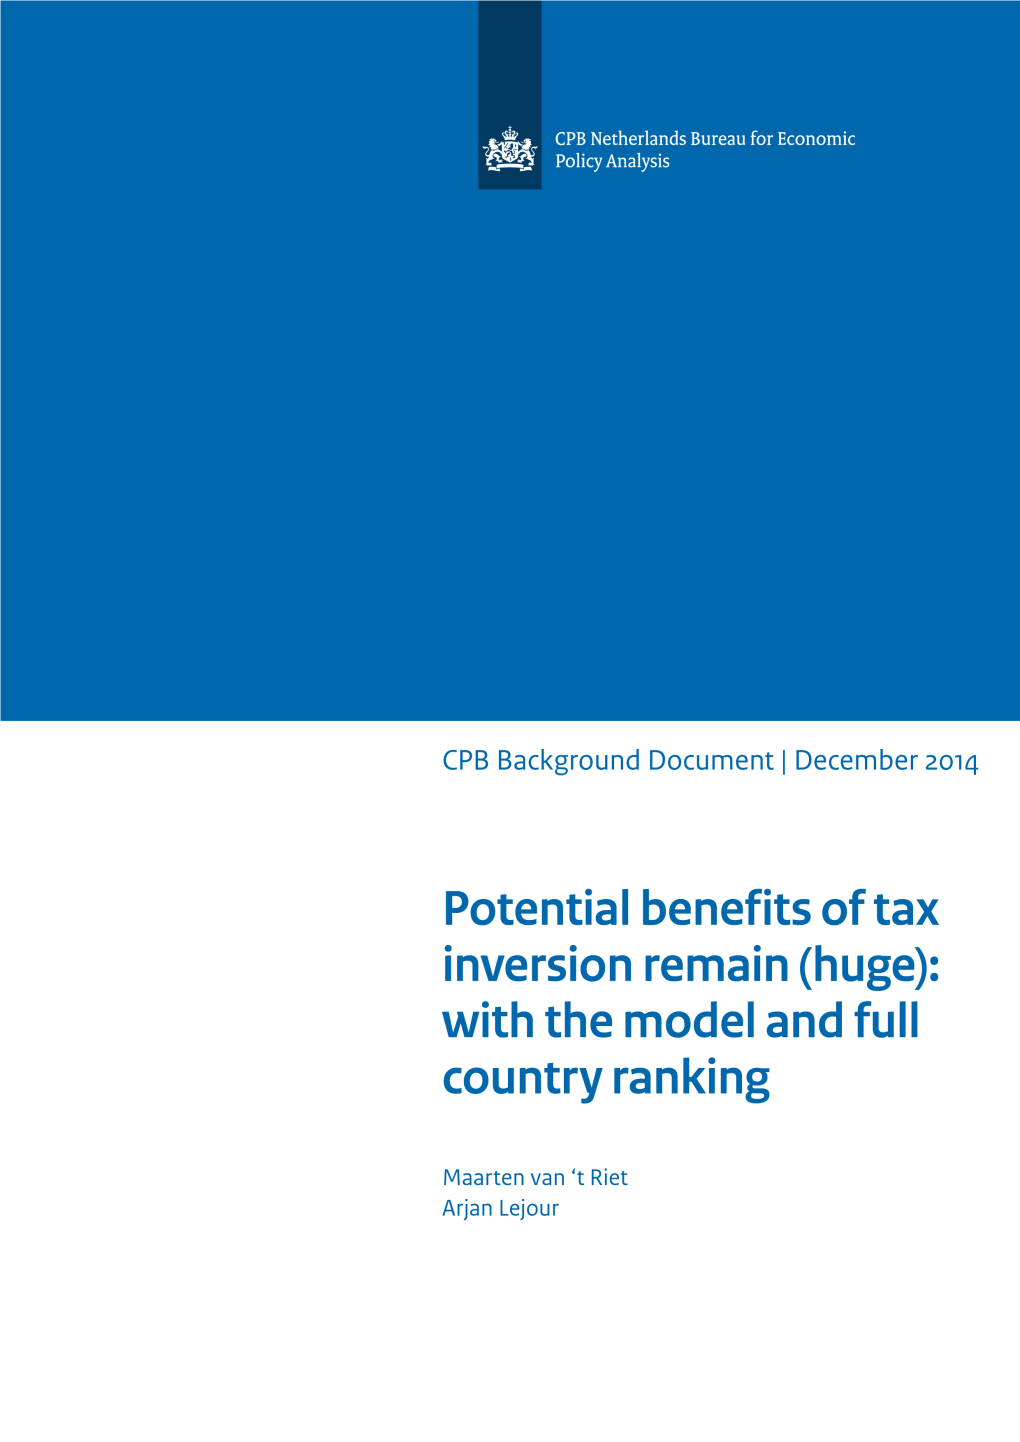 Potential Benefits of Tax Inversion Remain (Huge): with the Model and Full Country Ranking